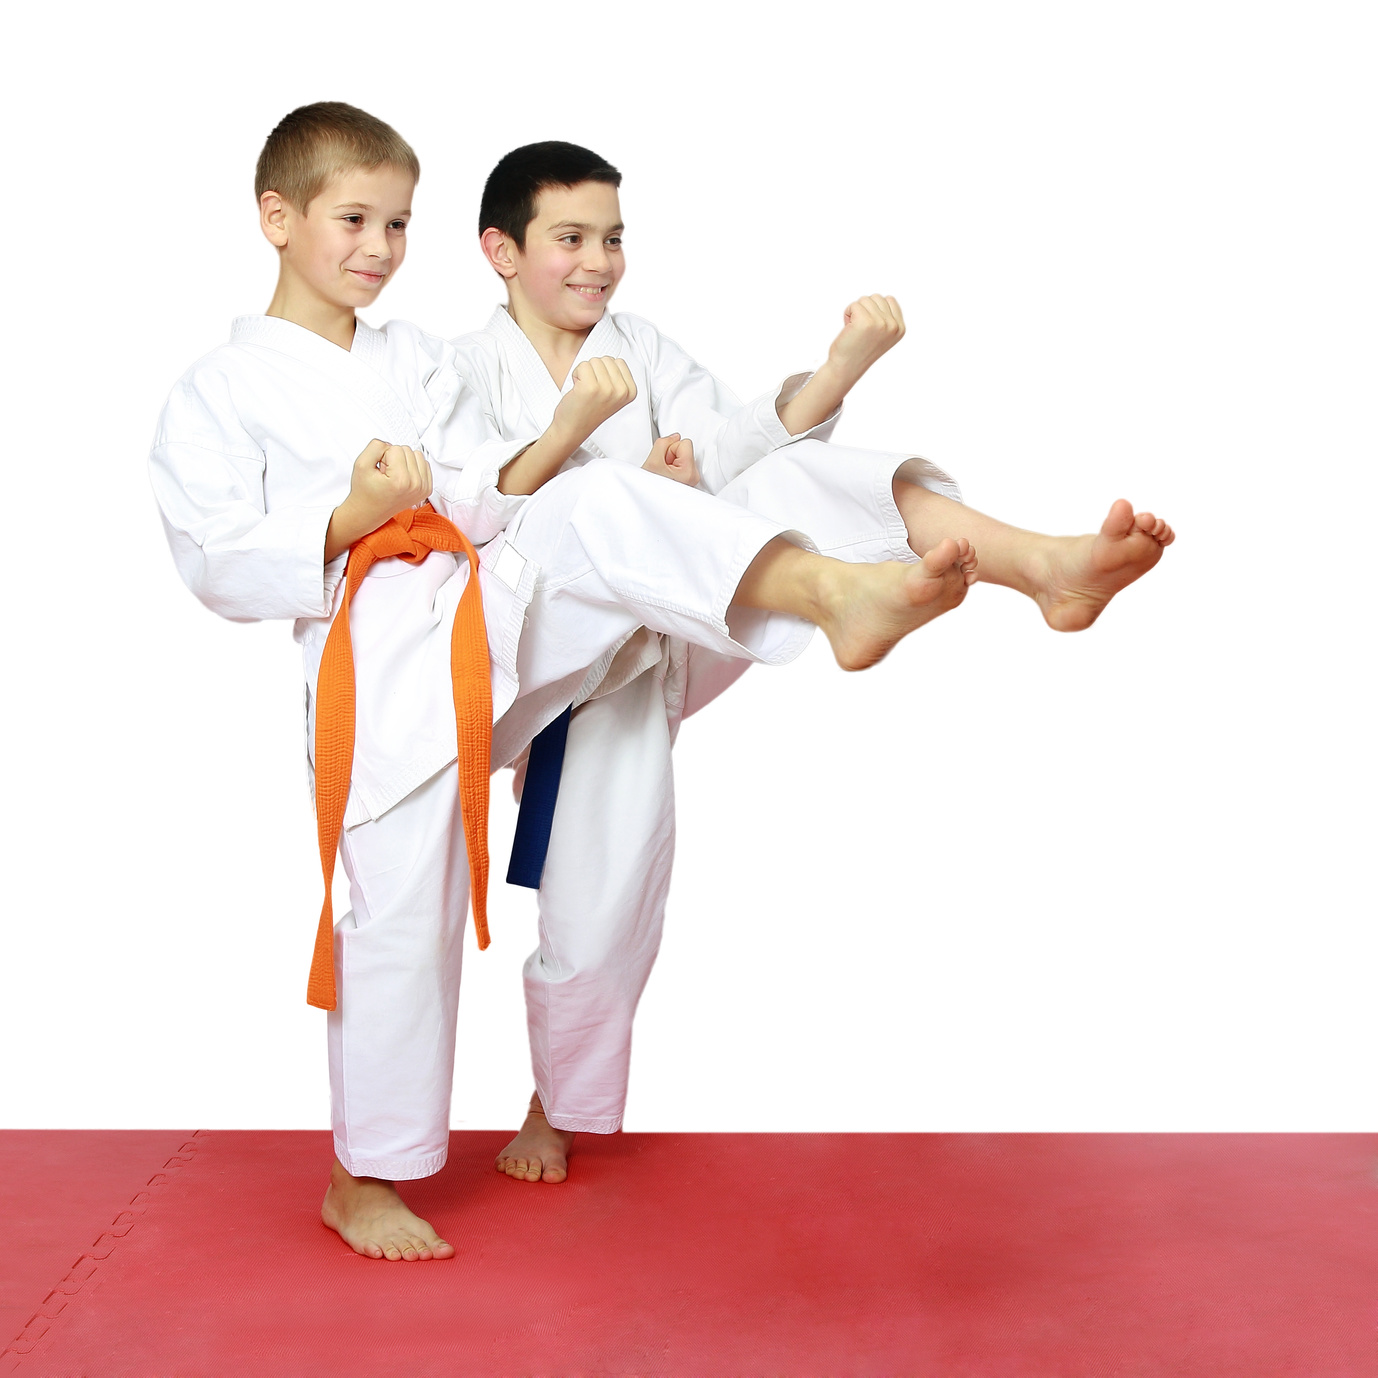 THE BEST MARTIAL ART FOR KIDS